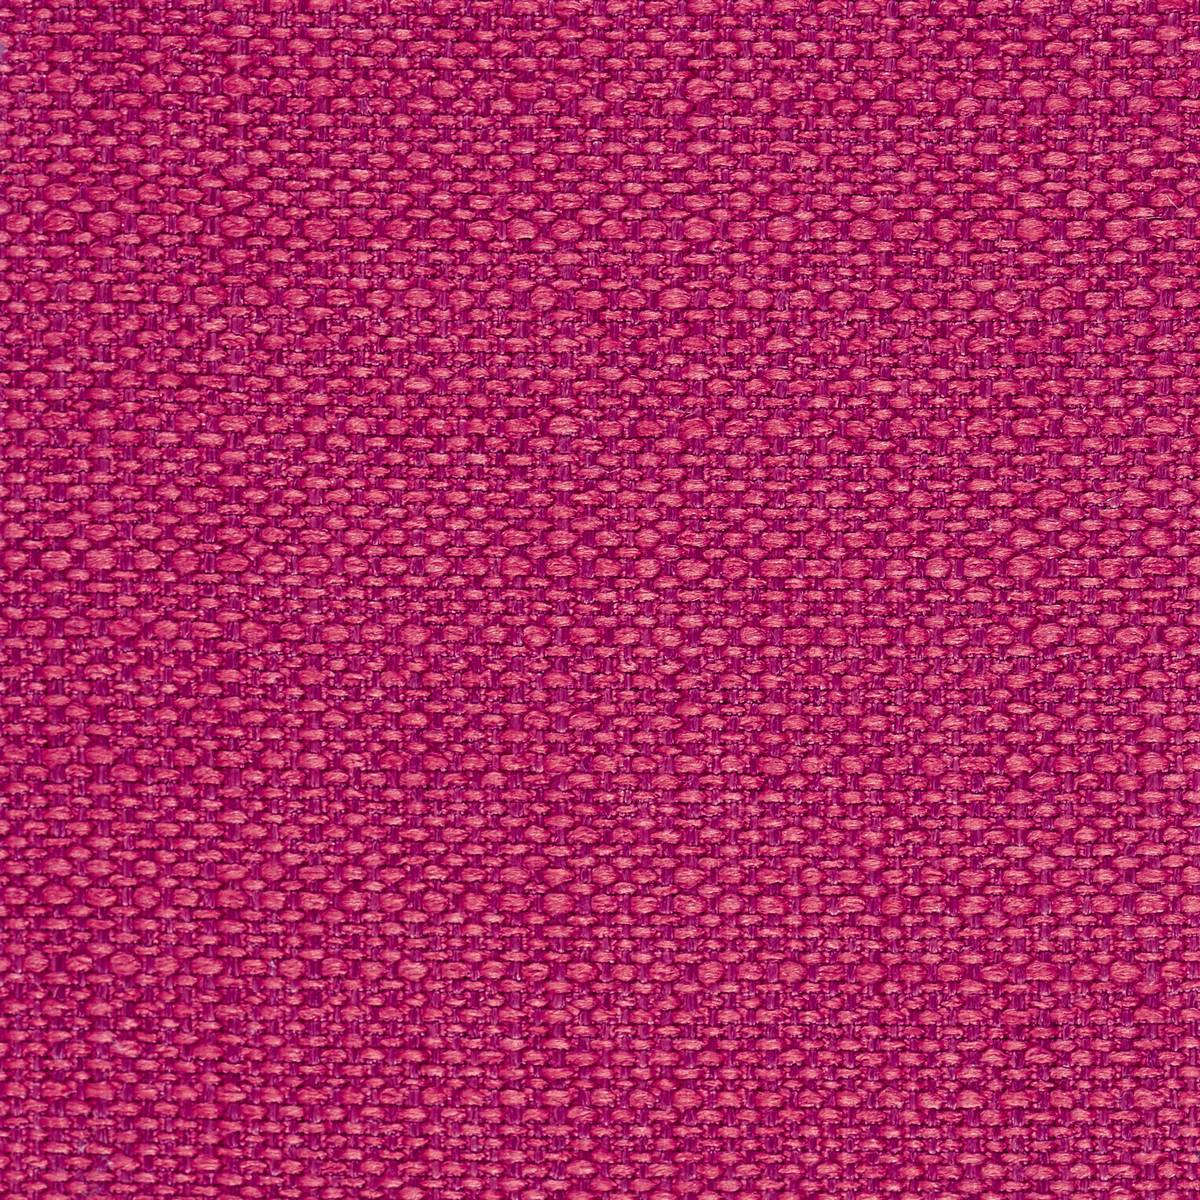 Particle Fuchsia Fabric by Harlequin